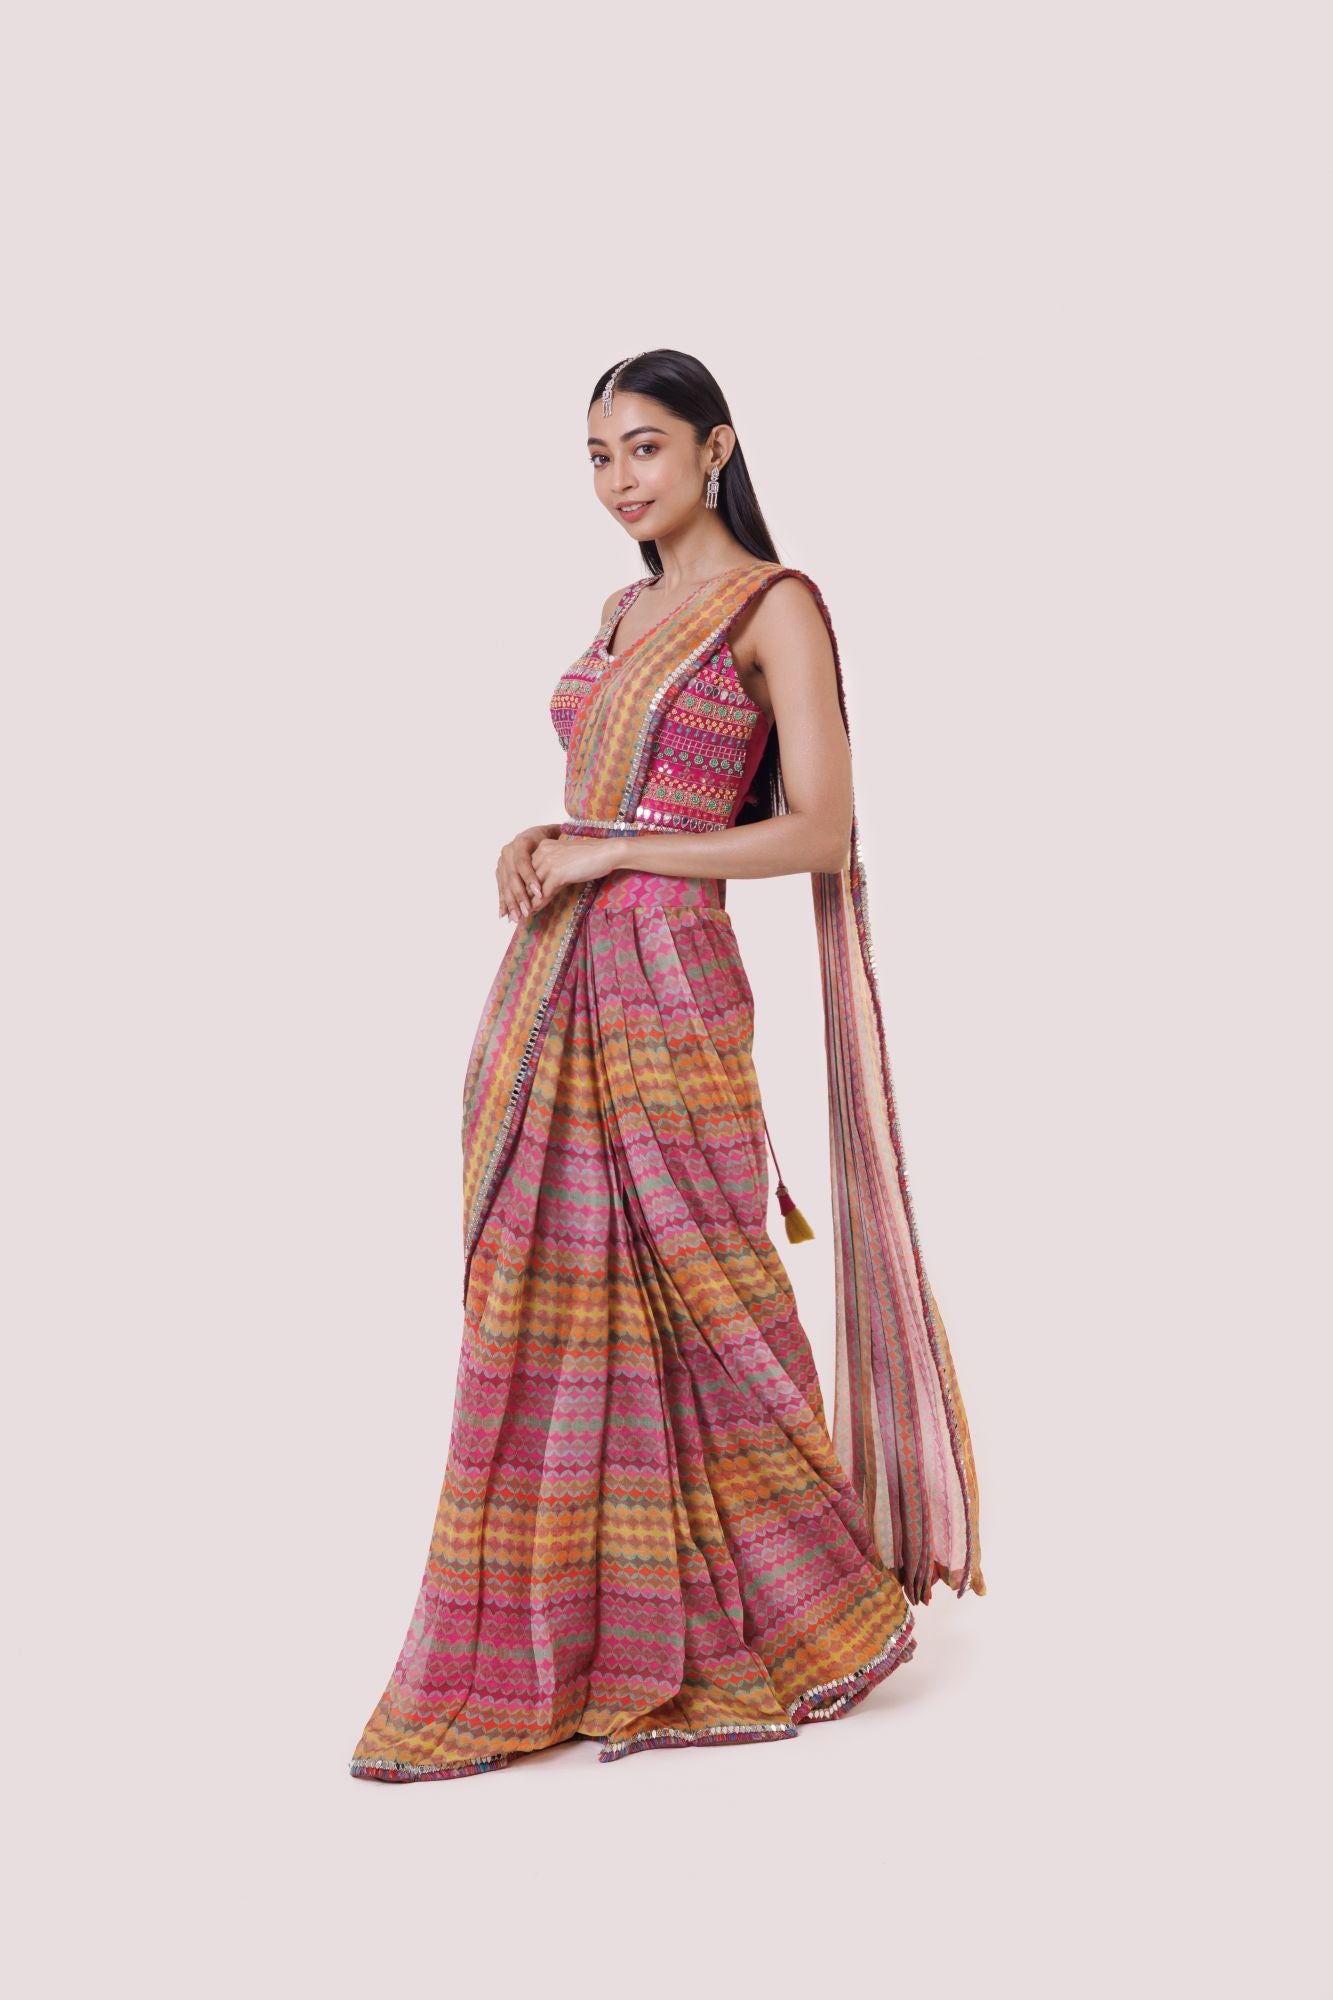 Shop multicolored embroidered saree with mirror and moti work. Make a fashion statement on festive occasions and weddings with designer sarees, designer suits, Indian dresses, Anarkali suits, palazzo suits, designer gowns, sharara suits, and embroidered sarees from Pure Elegance Indian fashion store in the USA.